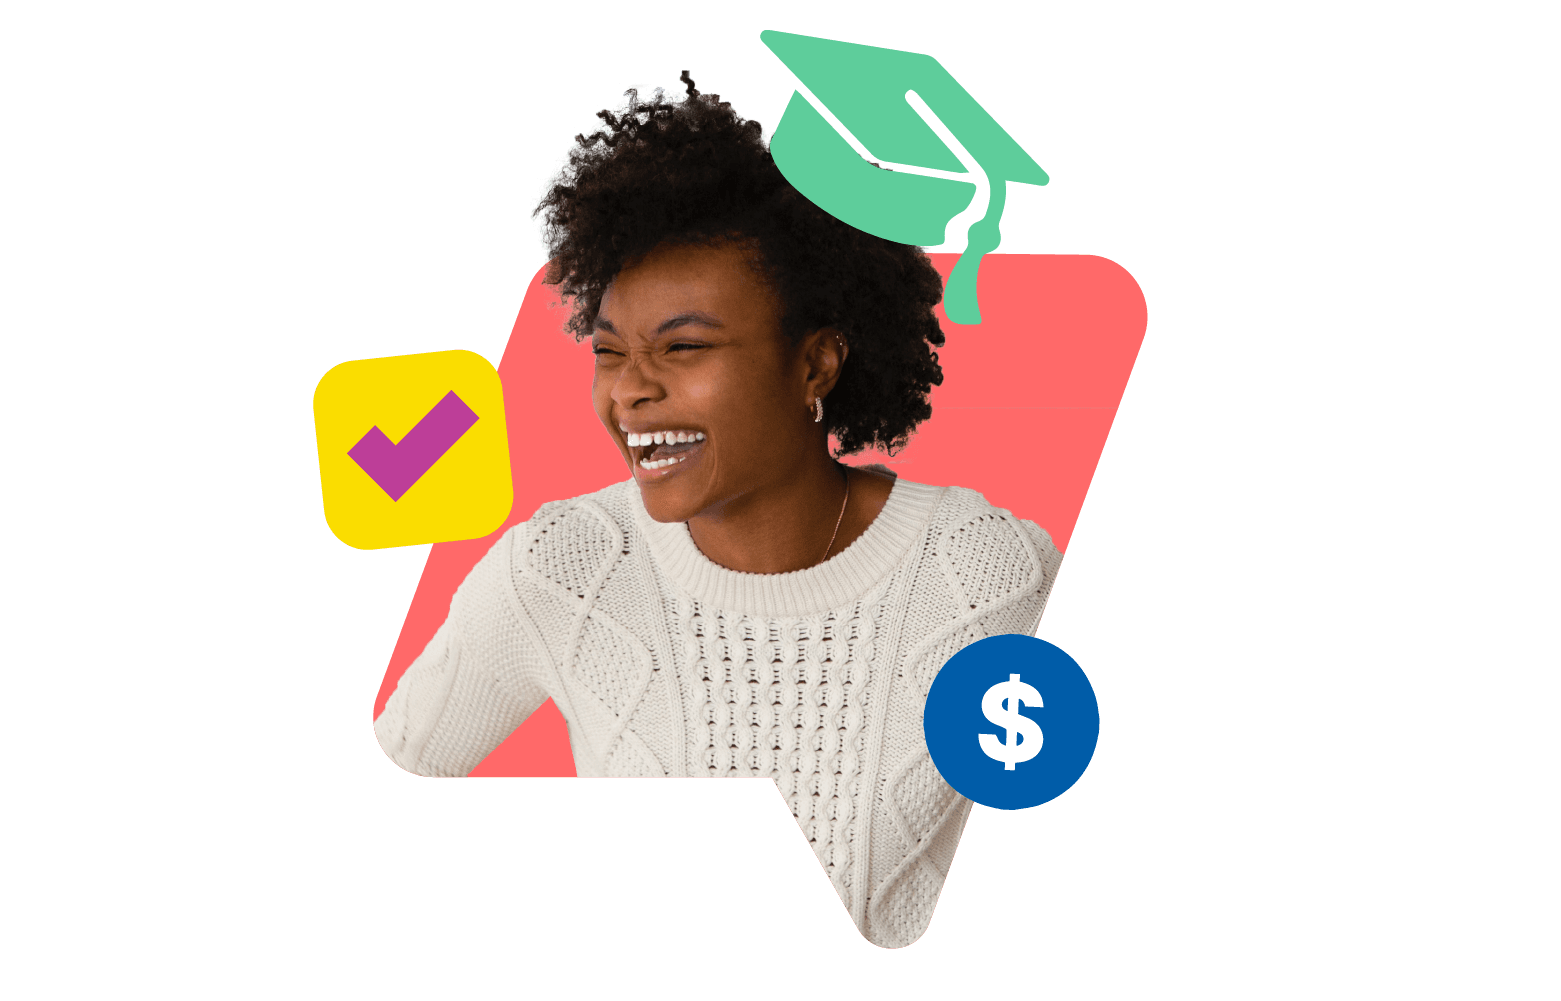 Woman smiling with a colorful icon of a grad hat on her head and a blue dollar sign near her